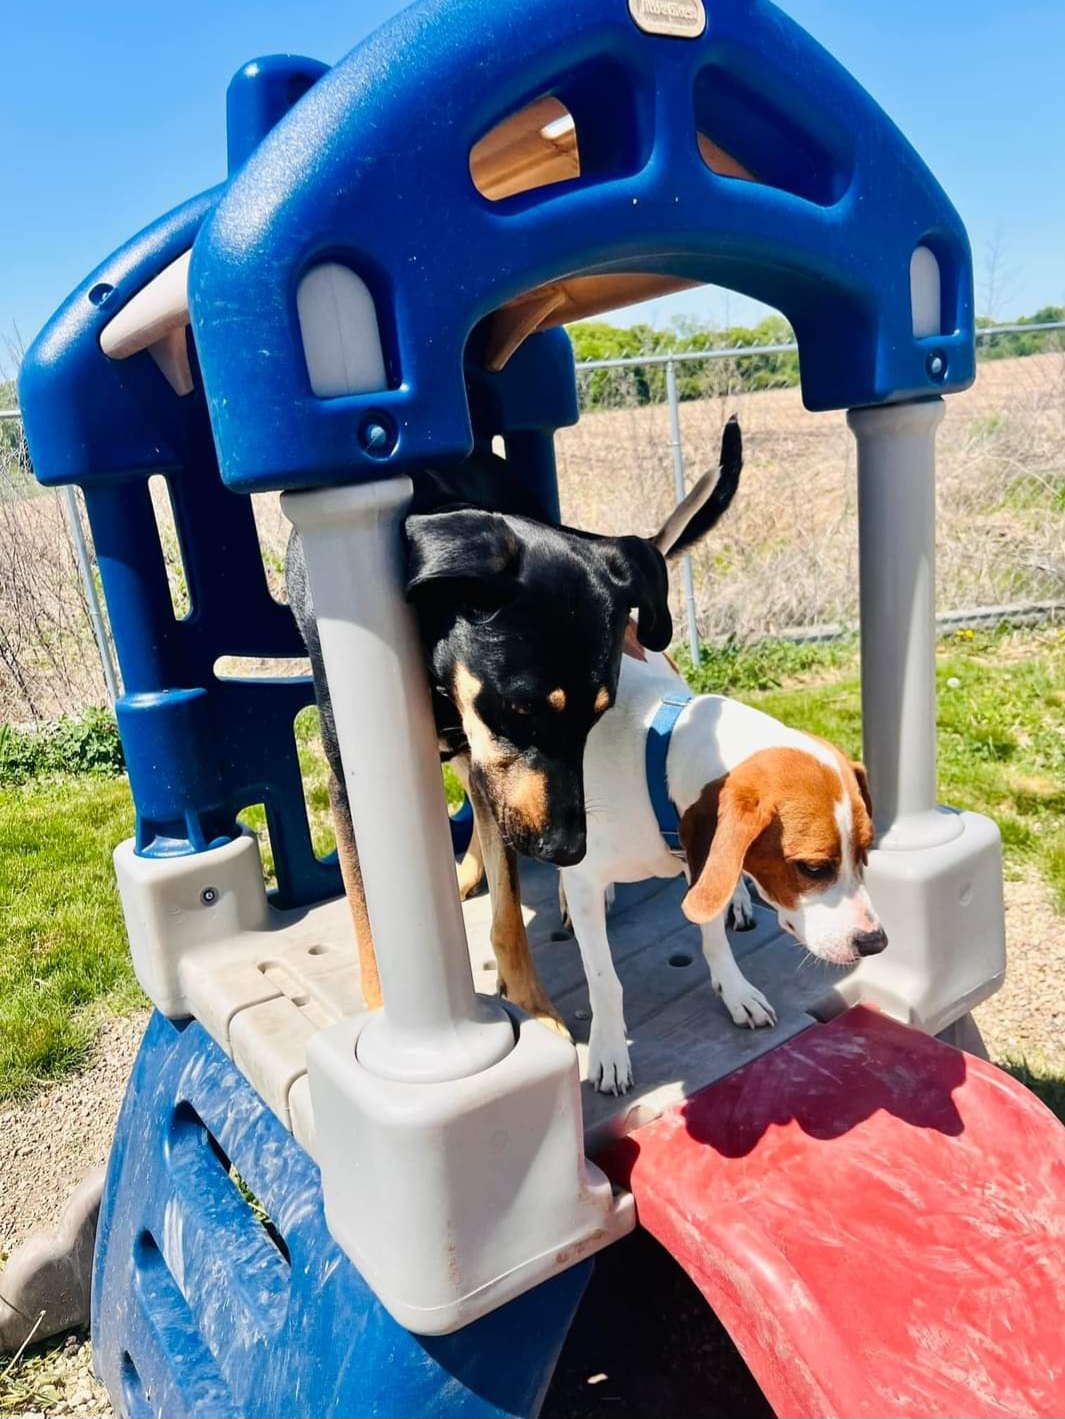 Running Acres Doggy Daycare and Boarding W9122 London Rd, Cambridge Wisconsin 53523